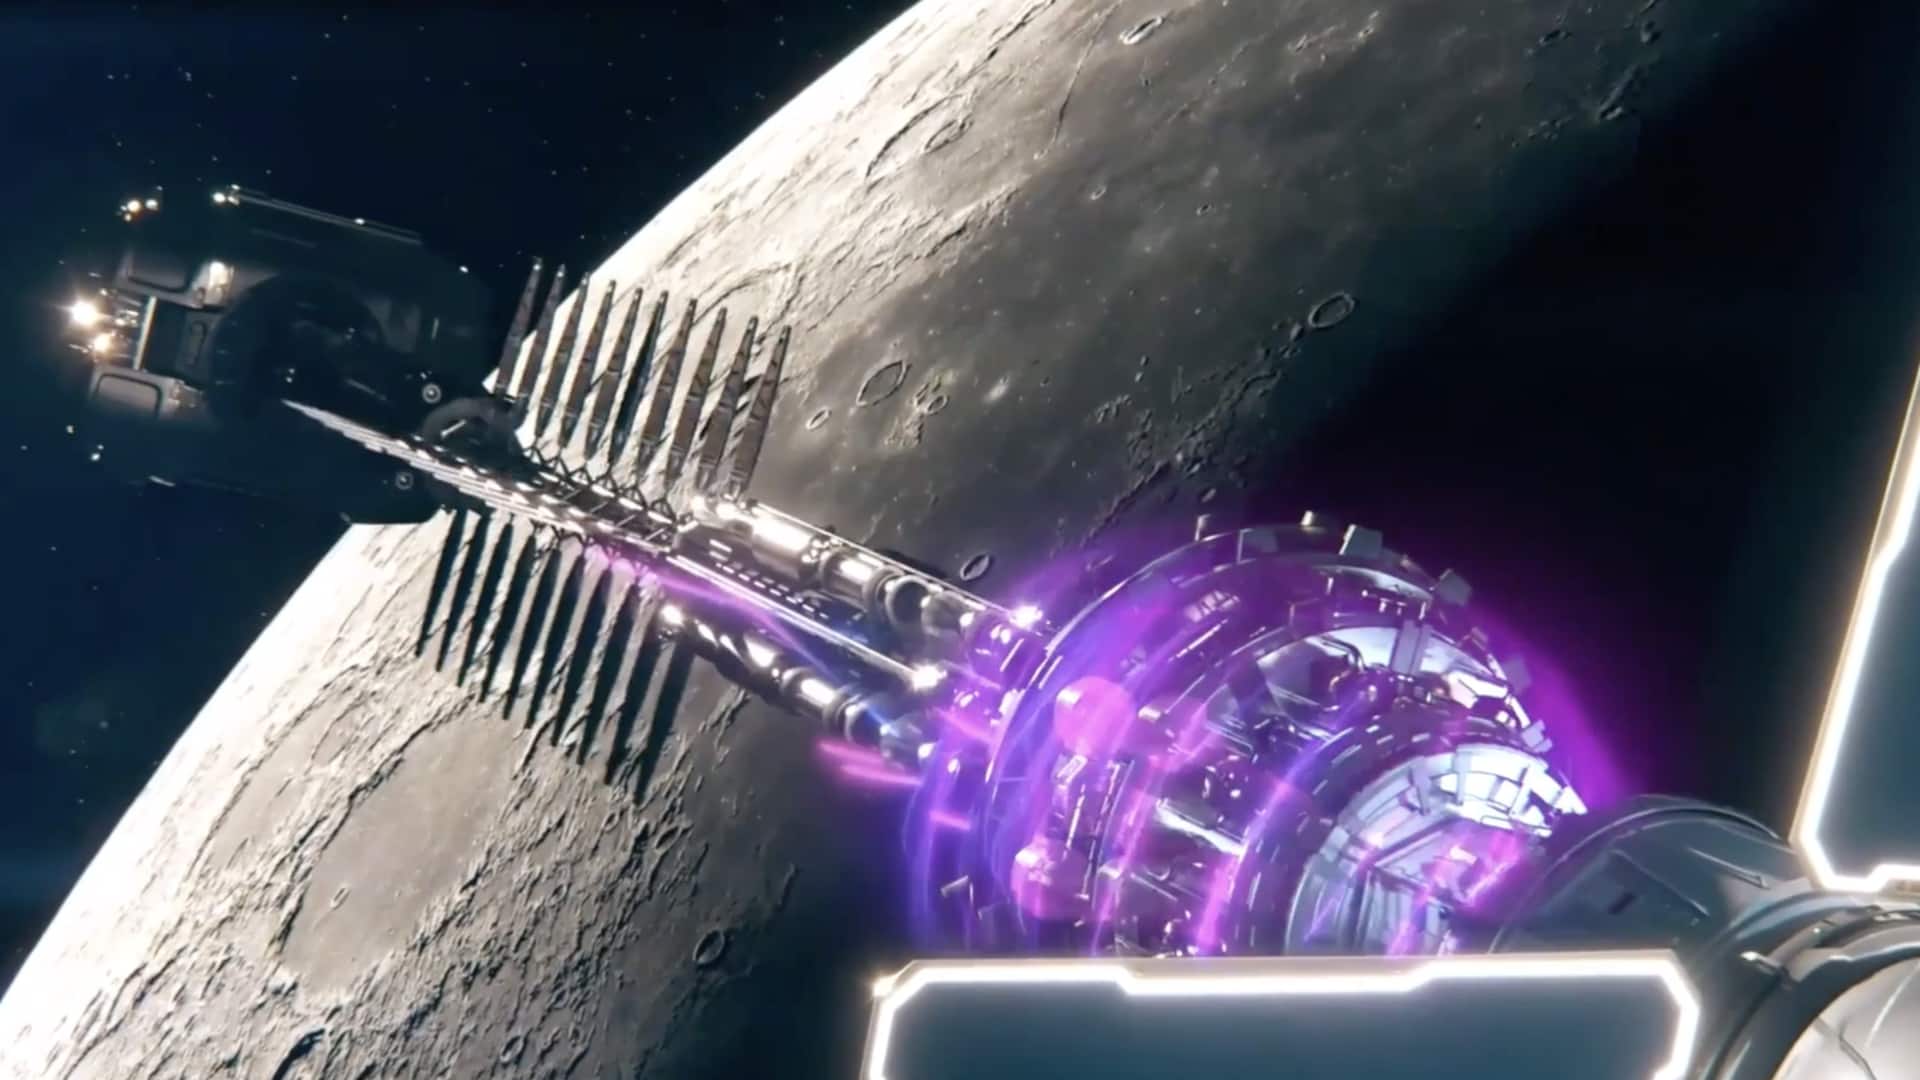 Rolls-Royce is working on a nuclear engine for space travel